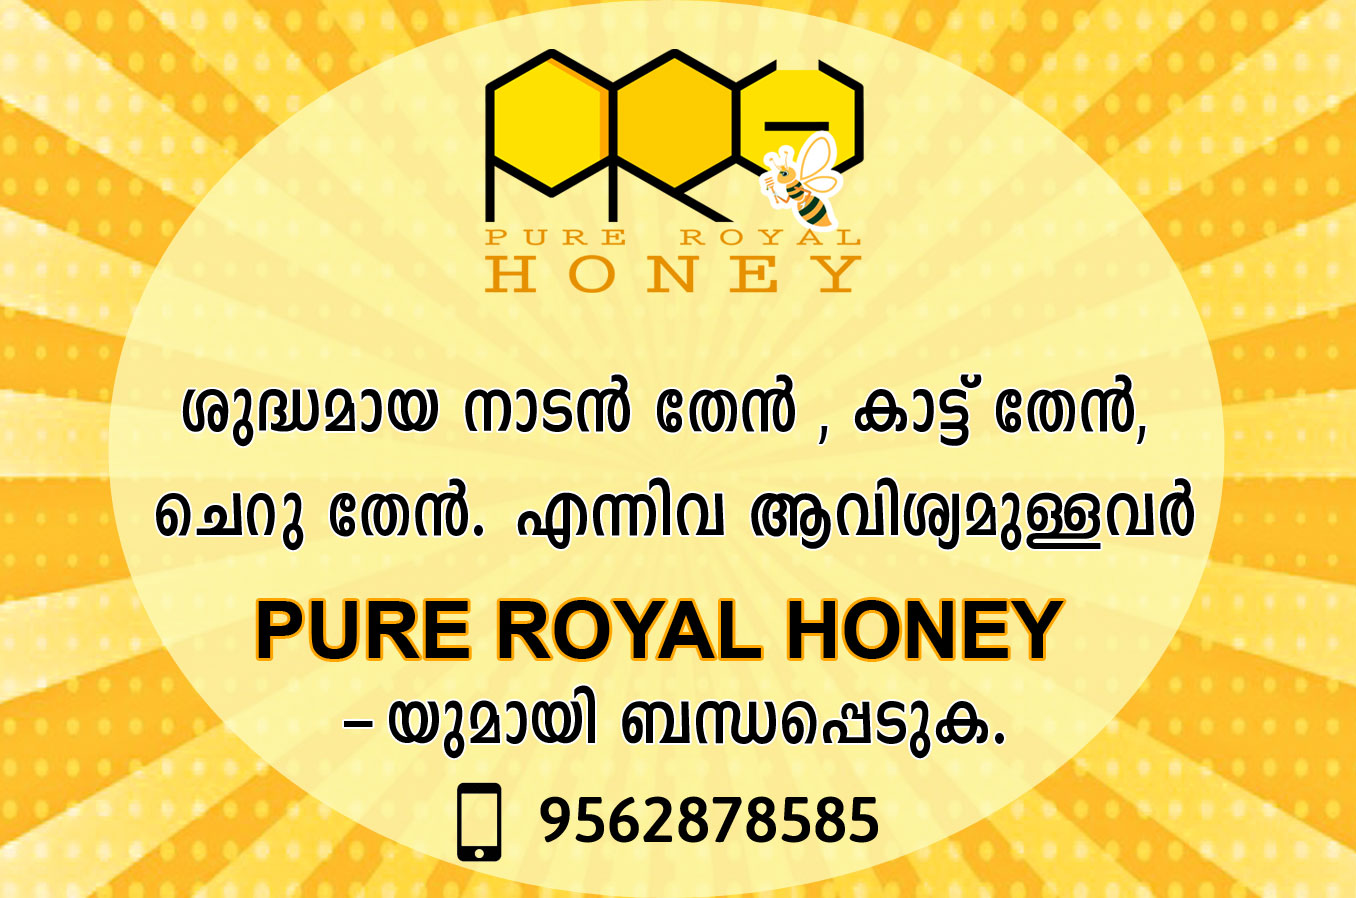 Omassery ,Kozhikode, Omassery ,Kozhikode Directory, Omassery ,Kozhikode Yellowpages, Omassery ,Kozhikode News, Omassery ,Kozhikode Guide, Tourist Spots in Omassery ,Kozhikode, Omassery ,Kozhikode History, Omassery ,Kozhikode Culture, Omassery ,Kozhikode Business, Omassery ,Kozhikode Economy, Omassery ,Kozhikode Shopping, Omassery ,Kozhikode Classifieds by Omassery ,Kozhikodeonline, instagram omassery ,omasseryonline , omasseryonline.com ,Call Taxi Services in Omassery, Kozhikode - Airport Taxi Service - Omassery , Omassery Online , omasseryonline , Bus Time Services in Omassery, Call Taxi Services near Omassery, Kozhikode , Find best Airport Taxi Service, Get Phone Numbers, Address, Reviews, Photos, Maps for top Call Taxi Services in Kozhikode on Justdial , omassery online, omasseyonline.com, Omassery, List of Call Taxi Services in Omassery,Kozhikode, Reviews, Map, Address, Phone number, Contact Number, local, popular Call Taxi Services, top Call Taxi Services, Shops And Stores in Omassery, Shops And Stores, Omassery, list of Shops And Stores in Omassery, shops And stores in omassery, Thamarassery, Calicut, kerala, Cab & Taxi Services in Omassery, Kozhikode - Local Non AC Taxi Booking - Justdial, Omassery , instagram omassery ,omasseryonline , omasseryonline.com, Omassery Online, OmasseryOnline, OMASSERYONLINE, OMASSERY, OMY, omy, Cab & Taxi Services, Omassery, Kozhikode, Omassery , instagram omassery ,omasseryonline , omasseryonline.com, Omassery Online, OmasseryOnline, OMASSERYONLINE, OMASSERY, OMY, omy, Find Local Non Ac Cab For Airport & Nearby Areas, Get Phone Number, Address, Reviews For Taxi Service Enquiry in Omassery, Kozhikode on Omassery , instagram omassery ,omasseryonline , omasseryonline.com, Omassery Online, OmasseryOnline, OMASSERYONLINE, OMASSERY, OMY, omy, Justdial, Cabs in Omassery Kozhikode, Local Taxi Service, Airport Taxi Service, Non Ac Taxi Services, Taxi Service Enquiry, Taxi Wala, Call Taxi Services, Taxi Services, Phone number, Address, Review, Omassery , instagram omassery ,omasseryonline , omasseryonline.com, Omassery Online, OmasseryOnline, OMASSERYONLINE, OMASSERY, OMY, omy,Omassery ,Kozhikode, Omassery ,Kozhikode Directory, Omassery ,Kozhikode Yellowpages, Omassery ,Kozhikode News, Omassery ,Kozhikode Guide, Tourist Spots in Omassery ,Kozhikode, Omassery ,Kozhikode History, Omassery ,Kozhikode Culture, Omassery ,Kozhikode Business, Omassery ,Kozhikode Economy, Omassery ,Kozhikode Shopping, Omassery ,Kozhikode Classifieds by Omassery ,Kozhikodeonline, instagram omassery ,omasseryonline , omasseryonline.com ,Career Services in Omassery, Kozhikode - careers , CAREERS, CAREER Service - Omassery , Omassery Online , omasseryonline , Bus Time Services in Omassery, Career placement Services near Omassery, Kozhikode, Find best Career Service, Get Phone Numbers, Address, Reviews, Photos, Placement for top Careers Services in Kozhikode on Justdial , omassery online, omasseyonline.com, Omassery, List of Careers, career Services in Omassery,Kozhikode, Reviews, Map, Address, Phone number, Contact Number, local, popular Careers, career Services, top Careers, career Services, Shops And Stores in Omassery, Shops And Stores, Omassery, list of Shops And Stores in Omassery, shops And stores in omassery, Thamarassery, Calicut, kerala, job & careers Services in Omassery, Kozhikode - Local careers search and Booking - Justdial, Omassery , instagram omassery ,omasseryonline , omasseryonline.com, Omassery Online, OmasseryOnline, OMASSERYONLINE, OMASSERY, OMY, omy, Careers & Job Services, Omassery, Kozhikode, Omassery , instagram omassery ,omasseryonline , omasseryonline.com, Omassery Online, OmasseryOnline, OMASSERYONLINE, OMASSERY, OMY, omy, Find Local Non Ac Cab For Airport & Nearby Areas, Get Phone Number, Address, Reviews For Taxi Service Enquiry in Omassery, Kozhikode on Omassery , instagram omassery ,omasseryonline , omasseryonline.com, Omassery Online, OmasseryOnline, OMASSERYONLINE, OMASSERY, OMY, omy, Justdial, Cabs in Omassery Kozhikode, career Service,career placement Service, Non Ac Taxi Services, Taxi Service Enquiry, Taxi Wala, Careers, career Services, careers in omassey & career Services in omy, Phone number, Address, Review, Omassery , instagram omassery ,omasseryonline , omasseryonline.com, Omassery Online, OmasseryOnline, OMASSERYONLINE, OMASSERY, OMY, omy,blood groups in omassery, Omassery , instagram omassery ,omasseryonline , omasseryonline.com, Omassery Online, OmasseryOnline, OMASSERYONLINE, OMASSERY, OMY, omy, blood bank in Omassery , instagram omassery ,omasseryonline , omasseryonline.com, Omassery Online, OmasseryOnline, OMASSERYONLINE, OMASSERY, OMY, omy,blood donors Omassery , instagram omassery ,omasseryonline , omasseryonline.com, Omassery Online, OmasseryOnline, OMASSERYONLINE, OMASSERY, OMY, omy , bloodbank, blood online, bank , blood, donors, omassery blood bank, blood needs, blood bank near omassery, calicut, thamarassery, kozhikode, kerala,Omassery , instagram omassery ,omasseryonline , omasseryonline.com, Omassery Online, OmasseryOnline, OMASSERYONLINE, OMASSERY, OMY, omy, save life, donate blood, blood register, register as a blood donor, blood ,blood needs in omassery, Omassery , instagram omassery ,omasseryonline , omasseryonline.com, Omassery Online, OmasseryOnline, OMASSERYONLINE, OMASSERY, OMY, omy, blood recievers, hospital, hospitals near by places in omassery, Omassery , instagram omassery ,omasseryonline , omasseryonline.com, Omassery Online, OmasseryOnline, OMASSERYONLINE, OMASSERY, OMY, omy,Hospital in omassery, hospital near by me in omassery, Omassery , instagram omassery ,omasseryonline , omasseryonline.com, Omassery Online, OmasseryOnline, OMASSERYONLINE, OMASSERY, OMY, omy, hospitals in omassery, omassery hospitals, Omasseryonline hospitals Omassery , instagram omassery ,omasseryonline , omasseryonline.com, Omassery Online, OmasseryOnline, OMASSERYONLINE, OMASSERY, OMY, omy , health care services in omassery,Omassery , instagram omassery ,omasseryonline , omasseryonline.com, Omassery Online, OmasseryOnline, OMASSERYONLINE, OMASSERY, OMY, omy,Doctors  groups in omassery, Omassery , instagram omassery ,omasseryonline , omasseryonline.com, Omassery Online, OmasseryOnline, OMASSERYONLINE, OMASSERY, OMY, omy, Doctors  services in Omassery , instagram omassery ,omasseryonline , omasseryonline.com, Omassery Online, OmasseryOnline, OMASSERYONLINE, OMASSERY, OMY, omy, Doctors  treatments Omassery , instagram omassery ,omasseryonline , omasseryonline.com, Omassery Online, OmasseryOnline, OMASSERYONLINE, OMASSERY, OMY, omy , Doctors services, Doctors  online, services , Doctors , treatments, omassery Doctors  services, Doctors  needs, Doctors  services near omassery, calicut, thamarassery, kozhikode, kerala,Omassery , instagram omassery ,omasseryonline , omasseryonline.com, Omassery Online, OmasseryOnline, OMASSERYONLINE, OMASSERY, OMY, omy, save life, donate Doctors , Doctors  register, register as a Doctors  donor, Doctors  ,Doctors  needs in omassery, Omassery , instagram omassery ,omasseryonline , omasseryonline.com, Omassery Online, OmasseryOnline, OMASSERYONLINE, OMASSERY, OMY, omy, Doctors  recievers, doctors, health clinics, health care, Doctors near by places in omassery, Omassery , instagram omassery ,omasseryonline , omasseryonline.com, Omassery Online, OmasseryOnline, OMASSERYONLINE, OMASSERY, OMY, omy,doctors, health clinics, health care in omassery, doctors, health clinics, health care near by me in omassery, Omassery , instagram omassery ,omasseryonline , omasseryonline.com, Omassery Online, OmasseryOnline, OMASSERYONLINE, OMASSERY, OMY, omy, Doctors in omassery, omassery Doctors, Omasseryonline Doctors Omassery , instagram omassery ,omasseryonline , omasseryonline.com, Omassery Online, OmasseryOnline, OMASSERYONLINE, OMASSERY, OMY, omy , health care services in omassery,Omassery , instagram omassery ,omasseryonline , omasseryonline.com, Omassery Online, OmasseryOnline, OMASSERYONLINE, OMASSERY, OMY, omy,Goverment Offices in omassery, Omassery , instagram omassery ,omasseryonline , omasseryonline.com, Omassery Online, OmasseryOnline, OMASSERYONLINE, OMASSERY, OMY, omy, Goverment Offices  services in Omassery , instagram omassery ,omasseryonline , omasseryonline.com, Omassery Online, OmasseryOnline, OMASSERYONLINE, OMASSERY, OMY, omy, Goverment Offices  treatments Omassery , instagram omassery ,omasseryonline , omasseryonline.com, Omassery Online, OmasseryOnline, OMASSERYONLINE, OMASSERY, OMY, omy , Goverment Offices services, Goverment Offices  online, services , Goverment Offices , treatments, omassery Goverment Offices  services, Goverment Offices  needs, Goverment Offices  services near omassery, calicut, thamarassery, kozhikode, kerala,Omassery , instagram omassery ,omasseryonline , omasseryonline.com, Omassery Online, OmasseryOnline, OMASSERYONLINE, OMASSERY, OMY, omy, save life, donate Goverment Offices , Goverment Offices  register, register as a Goverment Offices  donor, Goverment Offices  ,Goverment Offices  needs in omassery, Omassery , instagram omassery ,omasseryonline , omasseryonline.com, Omassery Online, OmasseryOnline, OMASSERYONLINE, OMASSERY, OMY, omy, Goverment Offices  recievers, Goverment Offices, offices & e-akshaya clinics, offices & e-akshaya care, Goverment Offices near by places in omassery, Omassery , instagram omassery ,omasseryonline , omasseryonline.com, Omassery Online, OmasseryOnline, OMASSERYONLINE, OMASSERY, OMY, omy,Goverment Offices, offices & e-akshaya clinics, offices & e-akshaya care in omassery, Goverment Offices, offices & e-akshaya clinics, offices & e-akshaya care near by me in omassery, Omassery , instagram omassery ,omasseryonline , omasseryonline.com, Omassery Online, OmasseryOnline, OMASSERYONLINE, OMASSERY, OMY, omy, Goverment Offices in omassery, omassery Goverment Offices, Omasseryonline Goverment Offices Omassery , instagram omassery ,omasseryonline , omasseryonline.com, Omassery Online, OmasseryOnline, OMASSERYONLINE, OMASSERY, OMY, omy , offices & e-akshaya care services in omassery,Omassery , instagram omassery ,omasseryonline , omasseryonline.com, Omassery Online, OmasseryOnline, OMASSERYONLINE, OMASSERY, OMY, omy,Omassery Online | Search Shops in Omassery, Search Job in Omassery, Search Blood in Omassery, Search Taxi in Omassery, Search Bus Time in Omassery | Omassery , Local Search ,online marketing in Omassery, Seo in Omassery, Target ad in Omassery,digital marketing in Omassery ,affiliate marketing in Omassery ,social media marketing in Omassery,marketing strategy in Omassery,email marketing in Omassery ,marketing plan in Omassery,advertising agency in Omassery,Omassery Bus Time Online,Omassery Taxi Numbers, Omassery Shops and Business Details, Omassery ,omasseryonline, Omassery Live , Omassery Updates, Omassery today,  Omessery, Omassery Blood bank ,Omassery Taxies, Omassery Travels, Omassery Hospitals, Omassery Bus time, Omassery Careers and Jobs , calicut jobs , job, hire, new jobs in the Worldwide, Omassery Calicut, Omassery Auto, Omassery Cars, Omassery Tumbo, Omassery Jeep, Omassery Bus, Omassery Lorry, Omassery Pickups, Taxi Contact Numbers Omassery, Bus time Omassery, www.omasseryonline.com, omy , shops in omy, omassery, calicut.